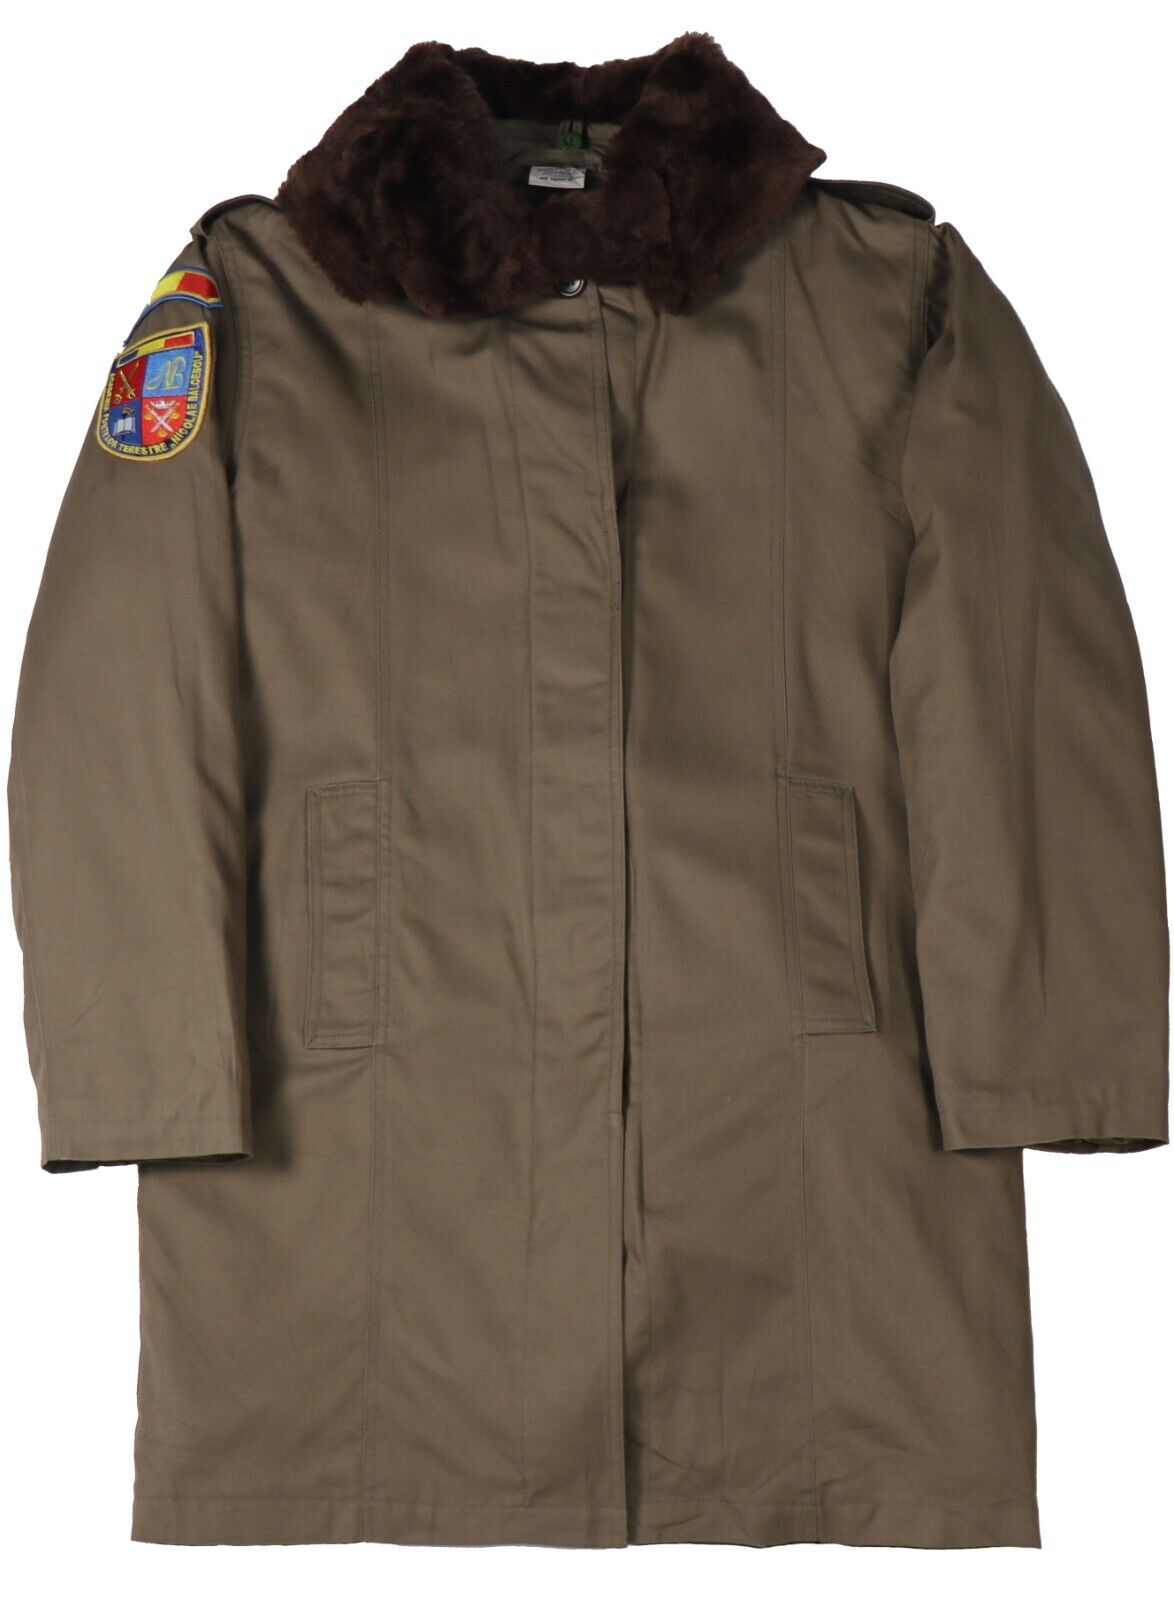 Medium (42) - Romanian Army Cold Weather Parka with Collar Military Jacket